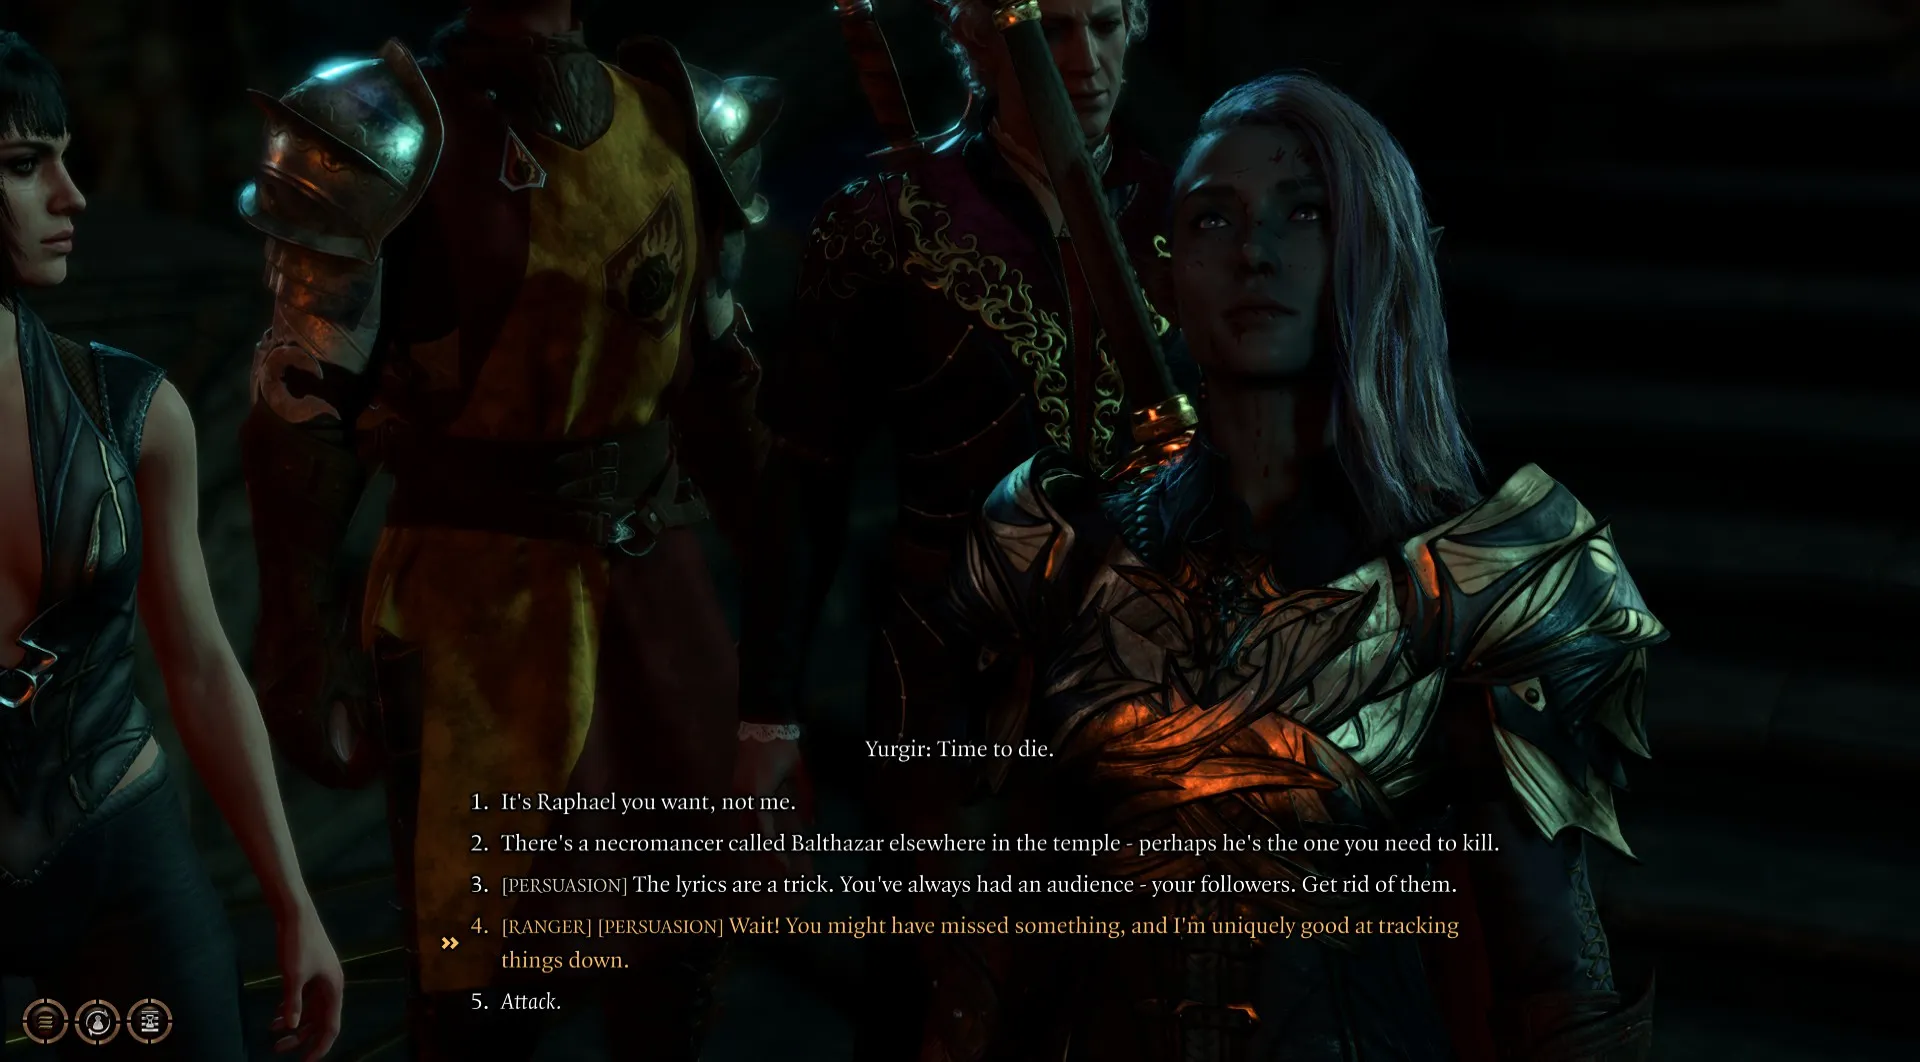 A Drow in Baldur's Gate 3 is shown interacting with an off-screen character.